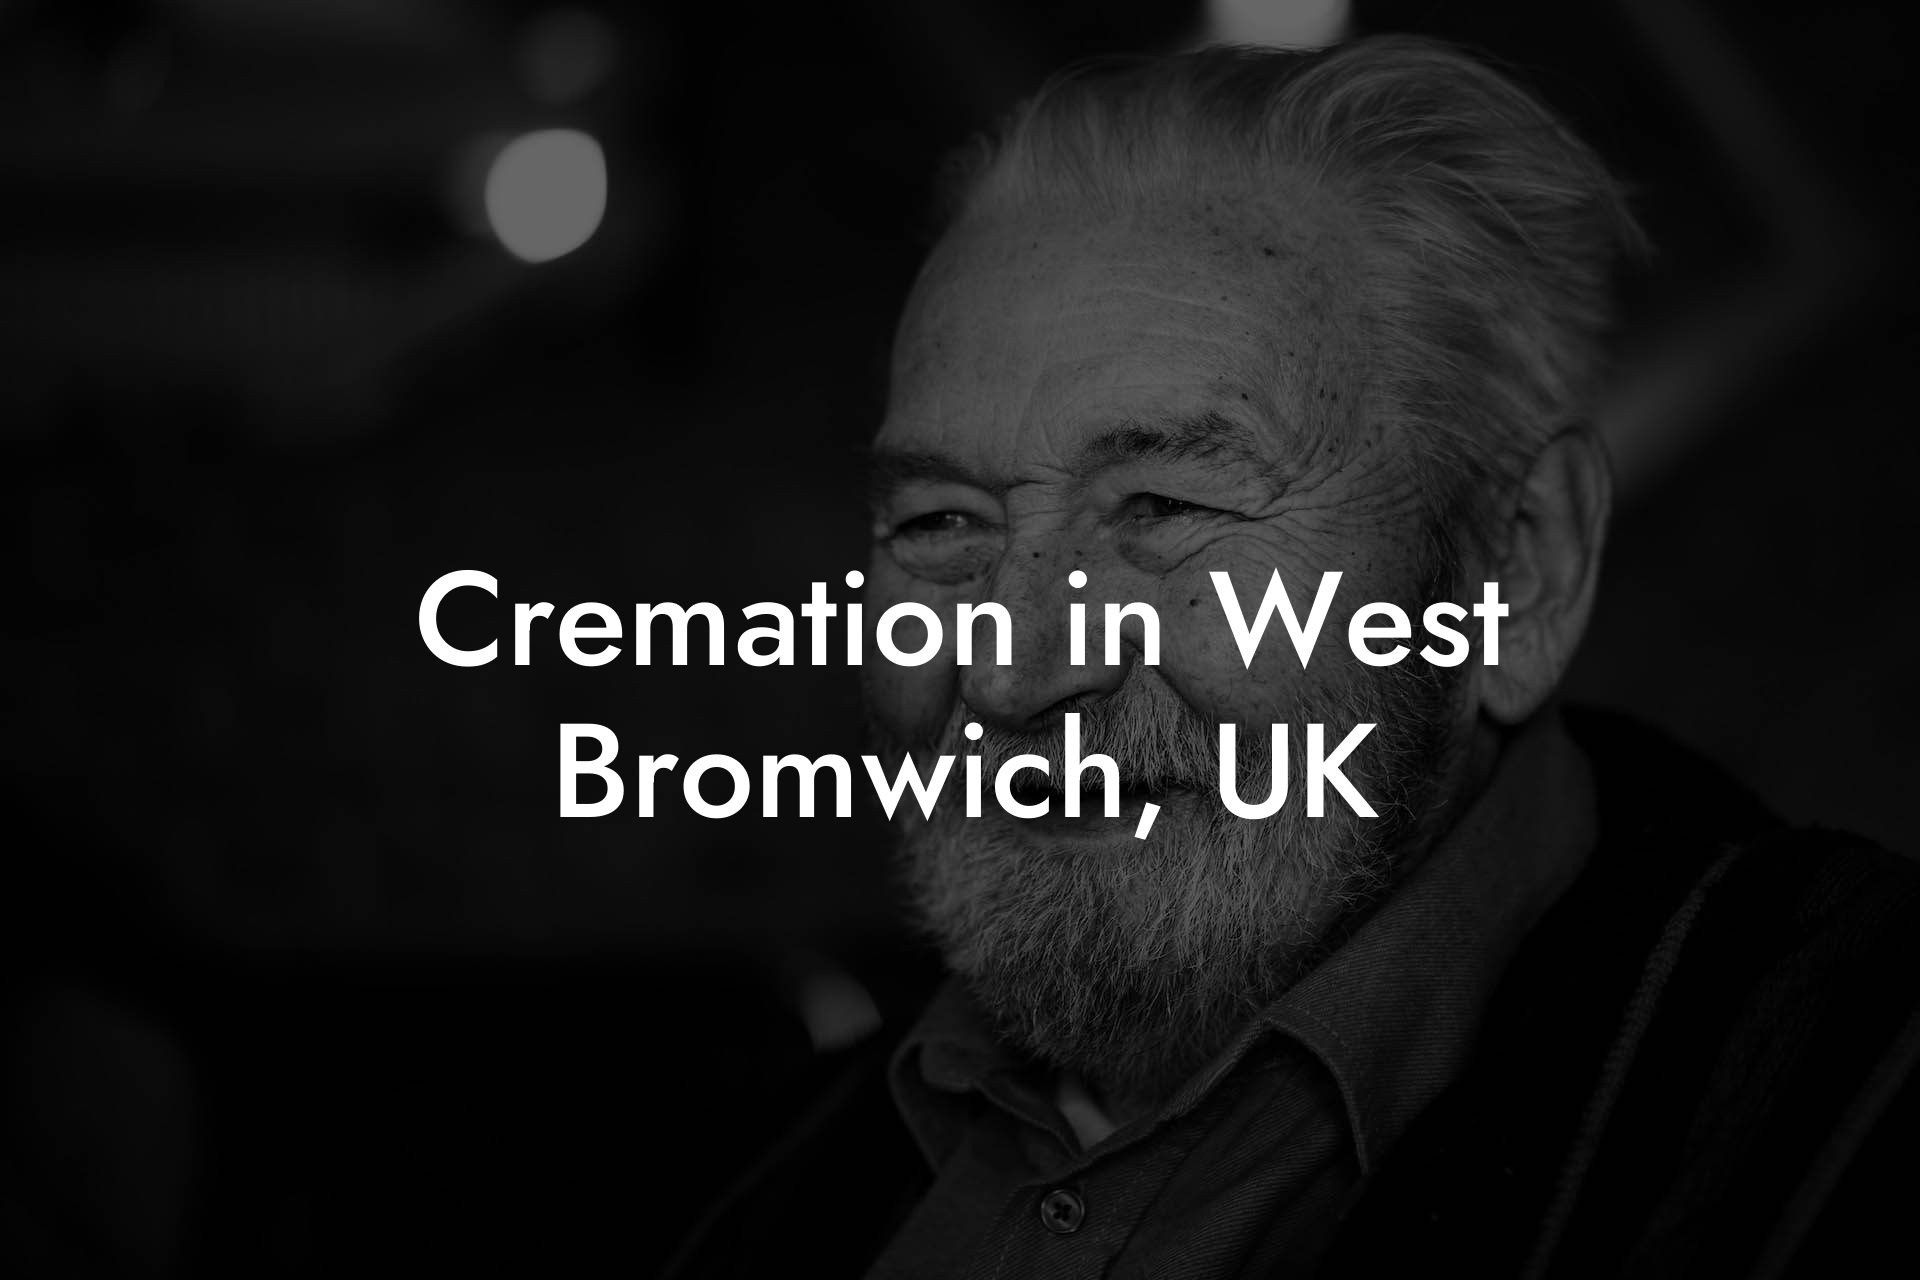 Cremation in West Bromwich, UK